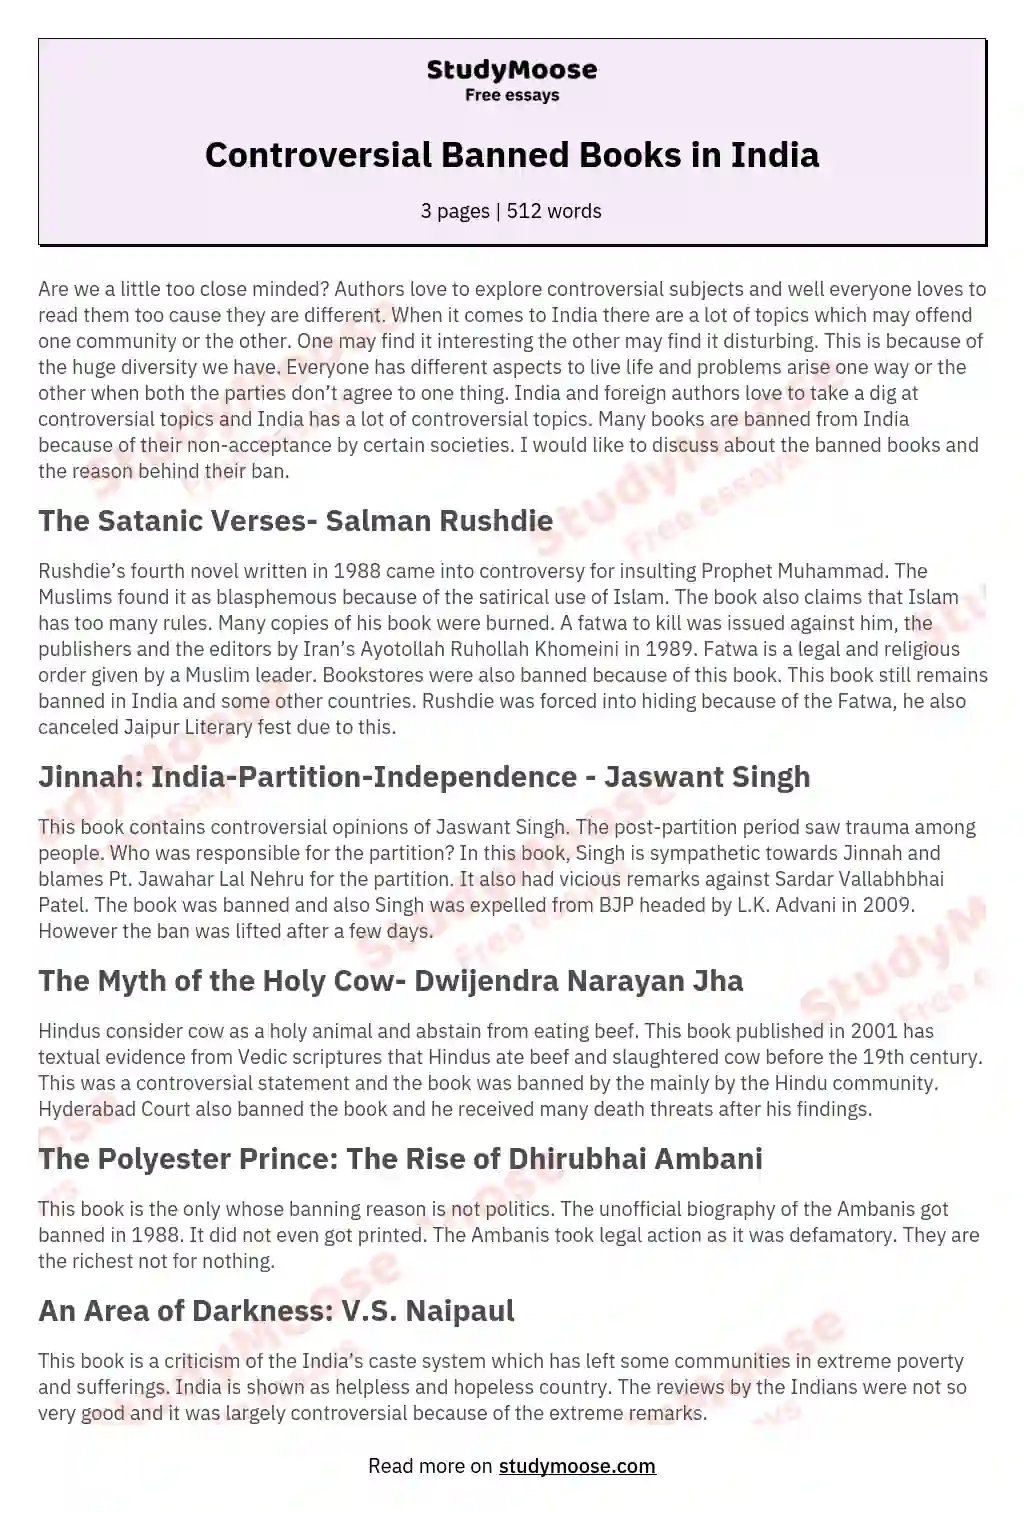 Controversial Banned Books in India